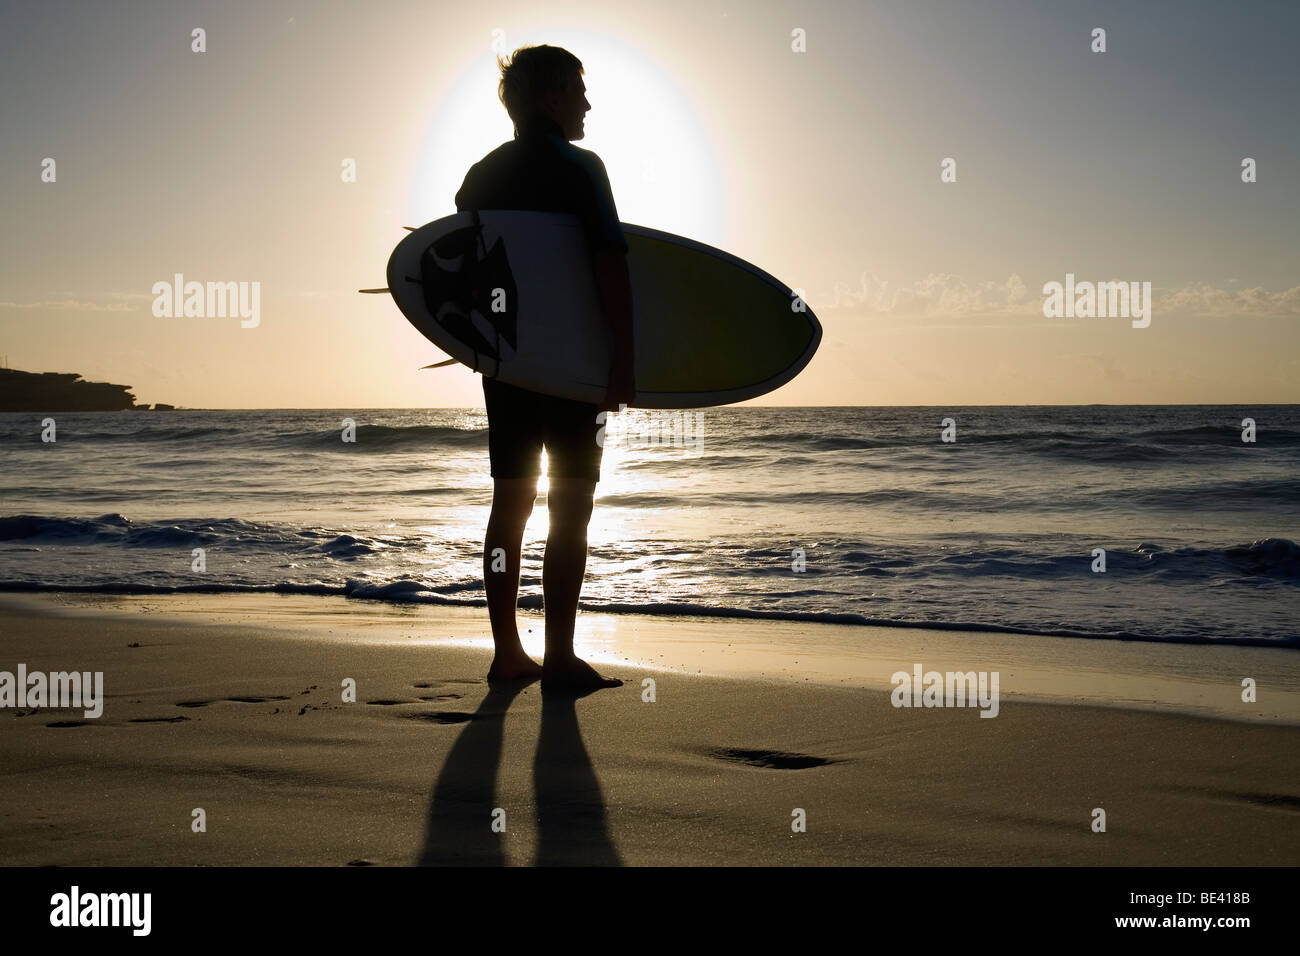 A surfer carrying surfboard is silhouetted by the morning sun.  Bondi Beach. Sydney, New South Wales, AUSTRALIA Stock Photo